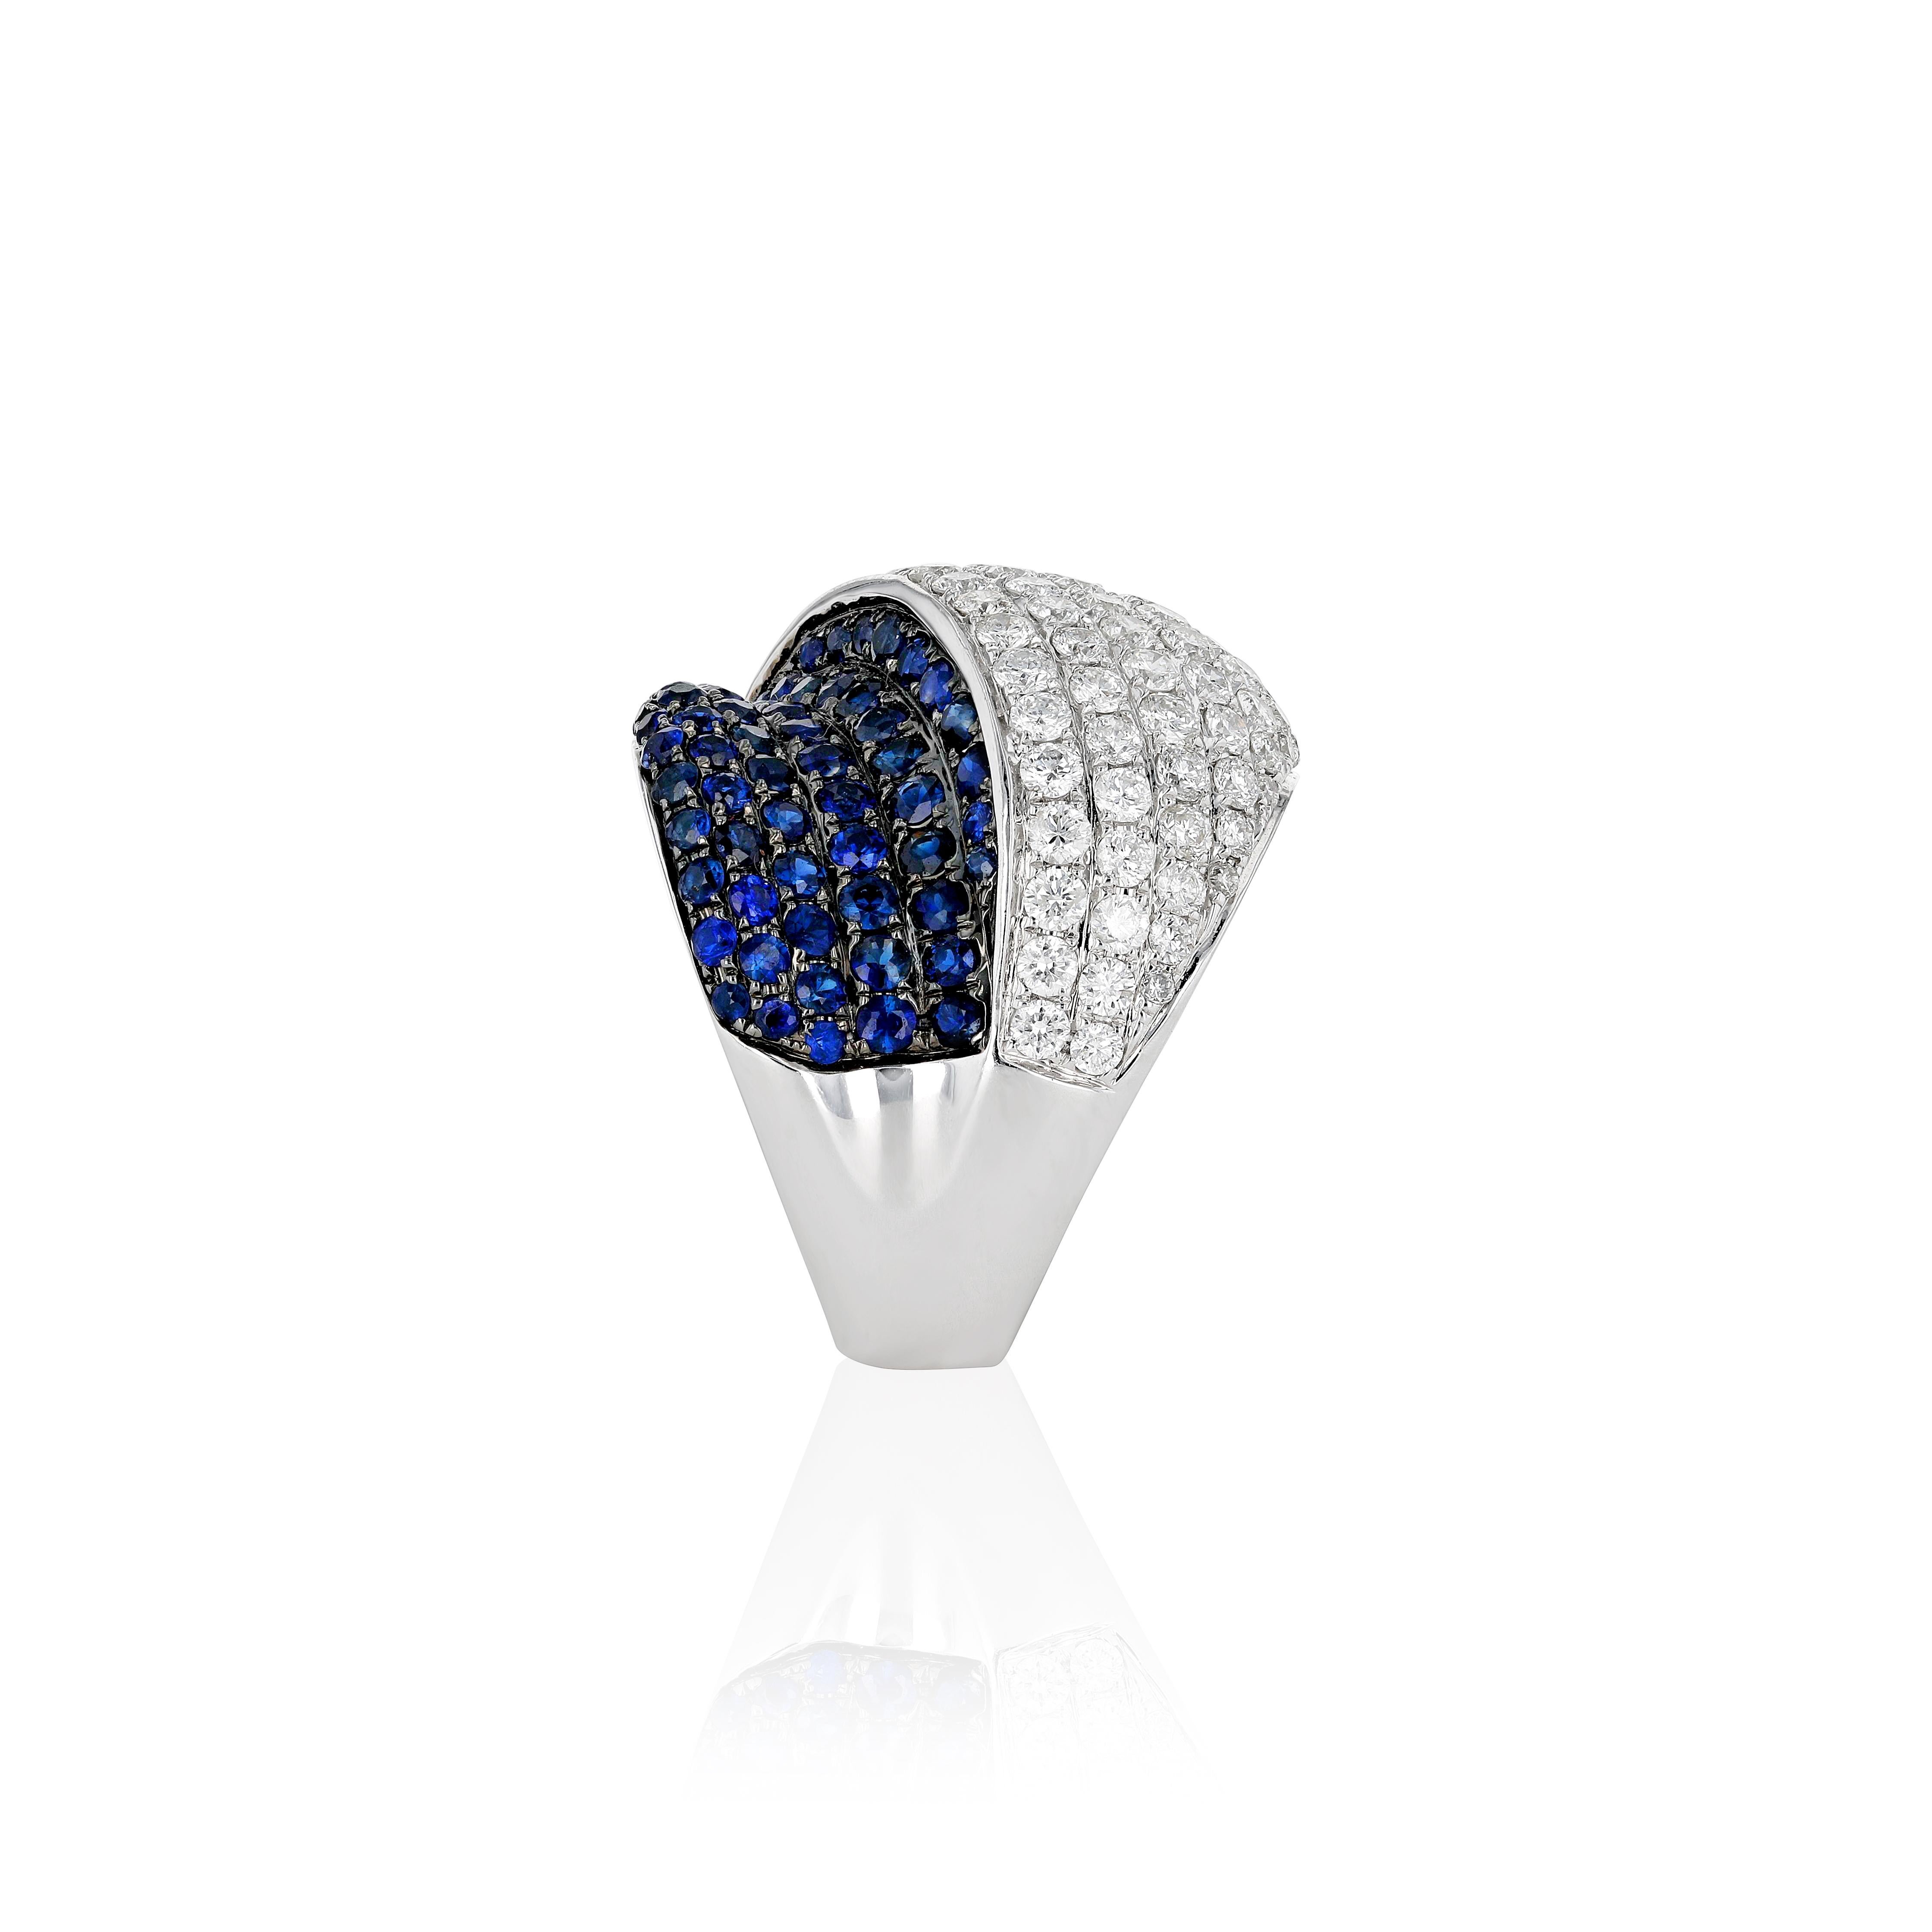 The matchless beauty of the blue sapphires that exhibits a rich, intense blue hue which is incorporated in this timelessly classy ring by Amwaj Jewelry . Set with a magnificent 1.64 ct round sapphire, the round cut diamond directs the eye to the